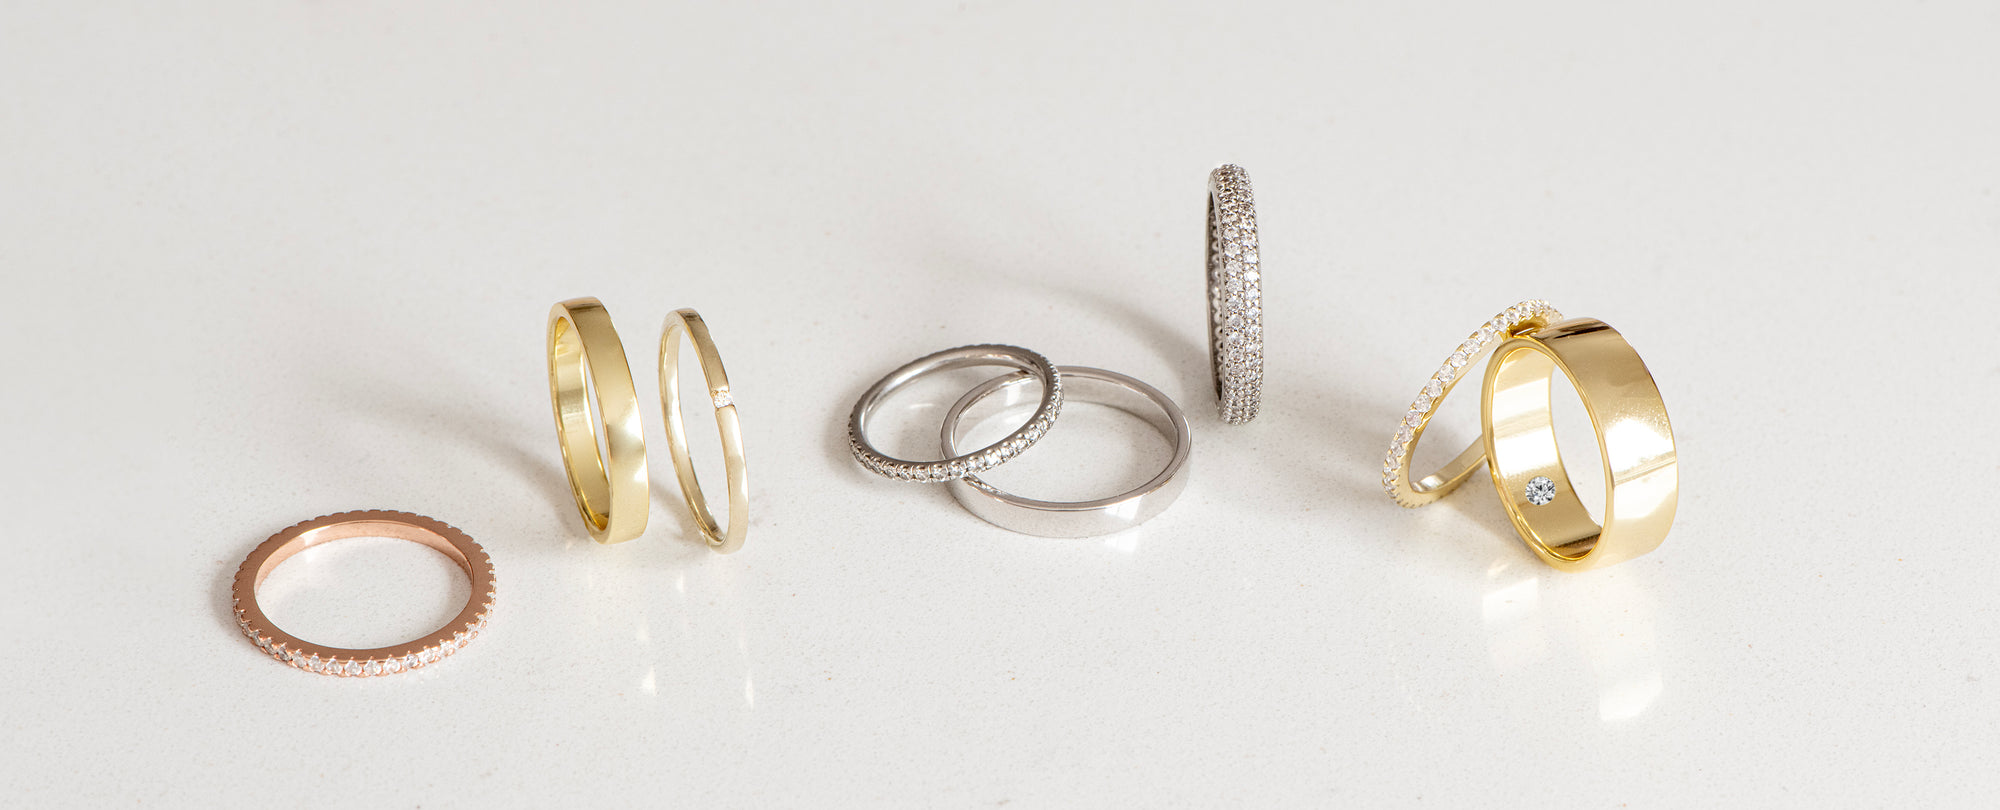 A close-up of a selection of wedding bands on a white background. The bands are made of 14K gold. They are also set with different stones, including diamonds, rubies, and sapphires. The bands are all different styles, from simple bands to more elaborate designs. The image is both beautiful and elegant, and it is sure to inspire couples who are looking for wedding bands.